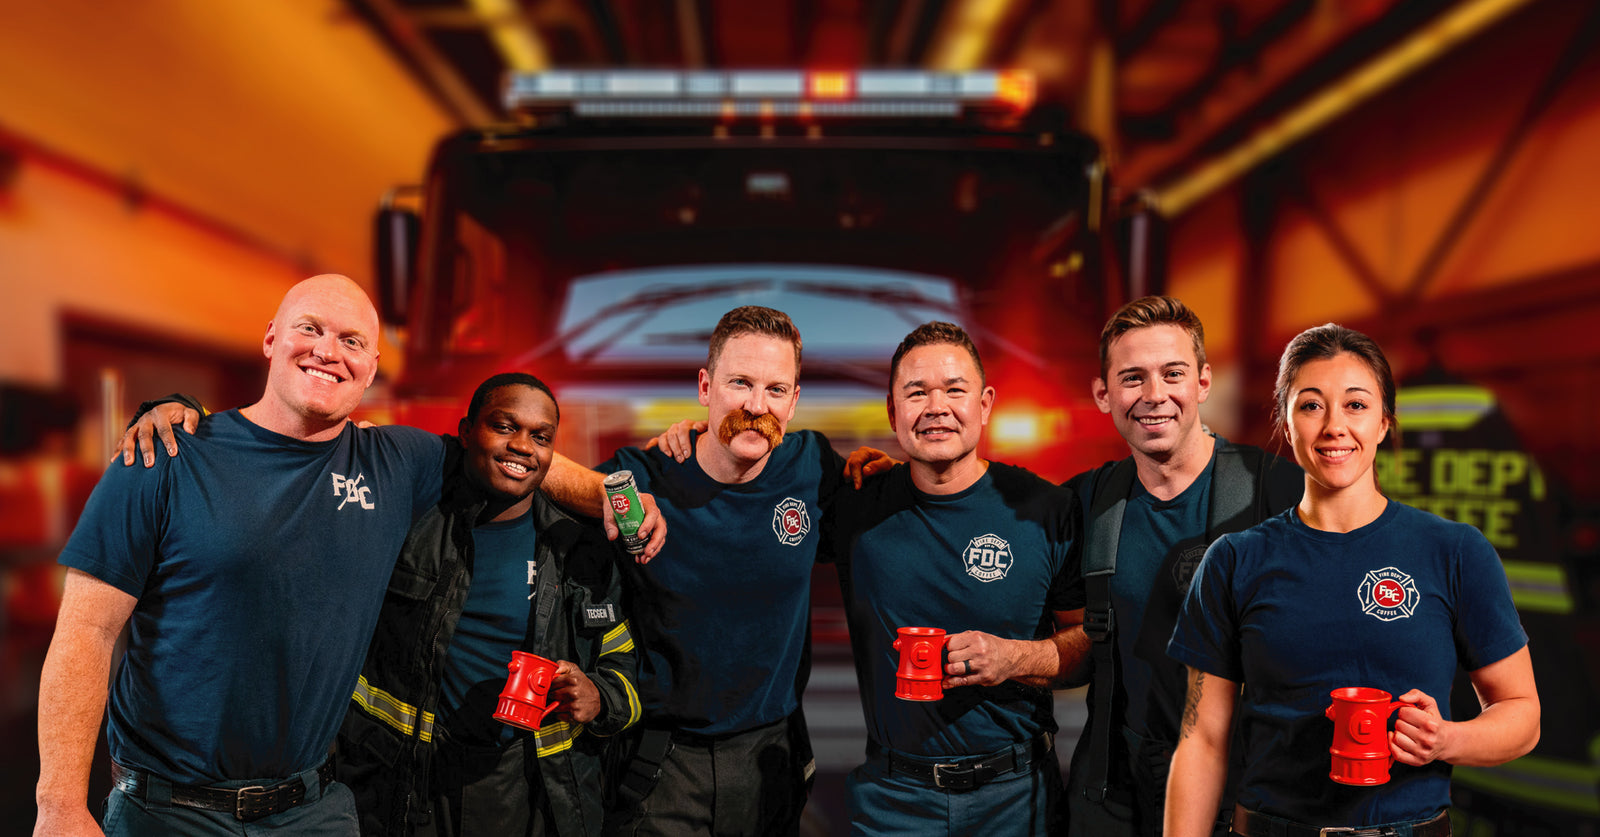 Group of firefighters gathered and smiling with coffee in hand.